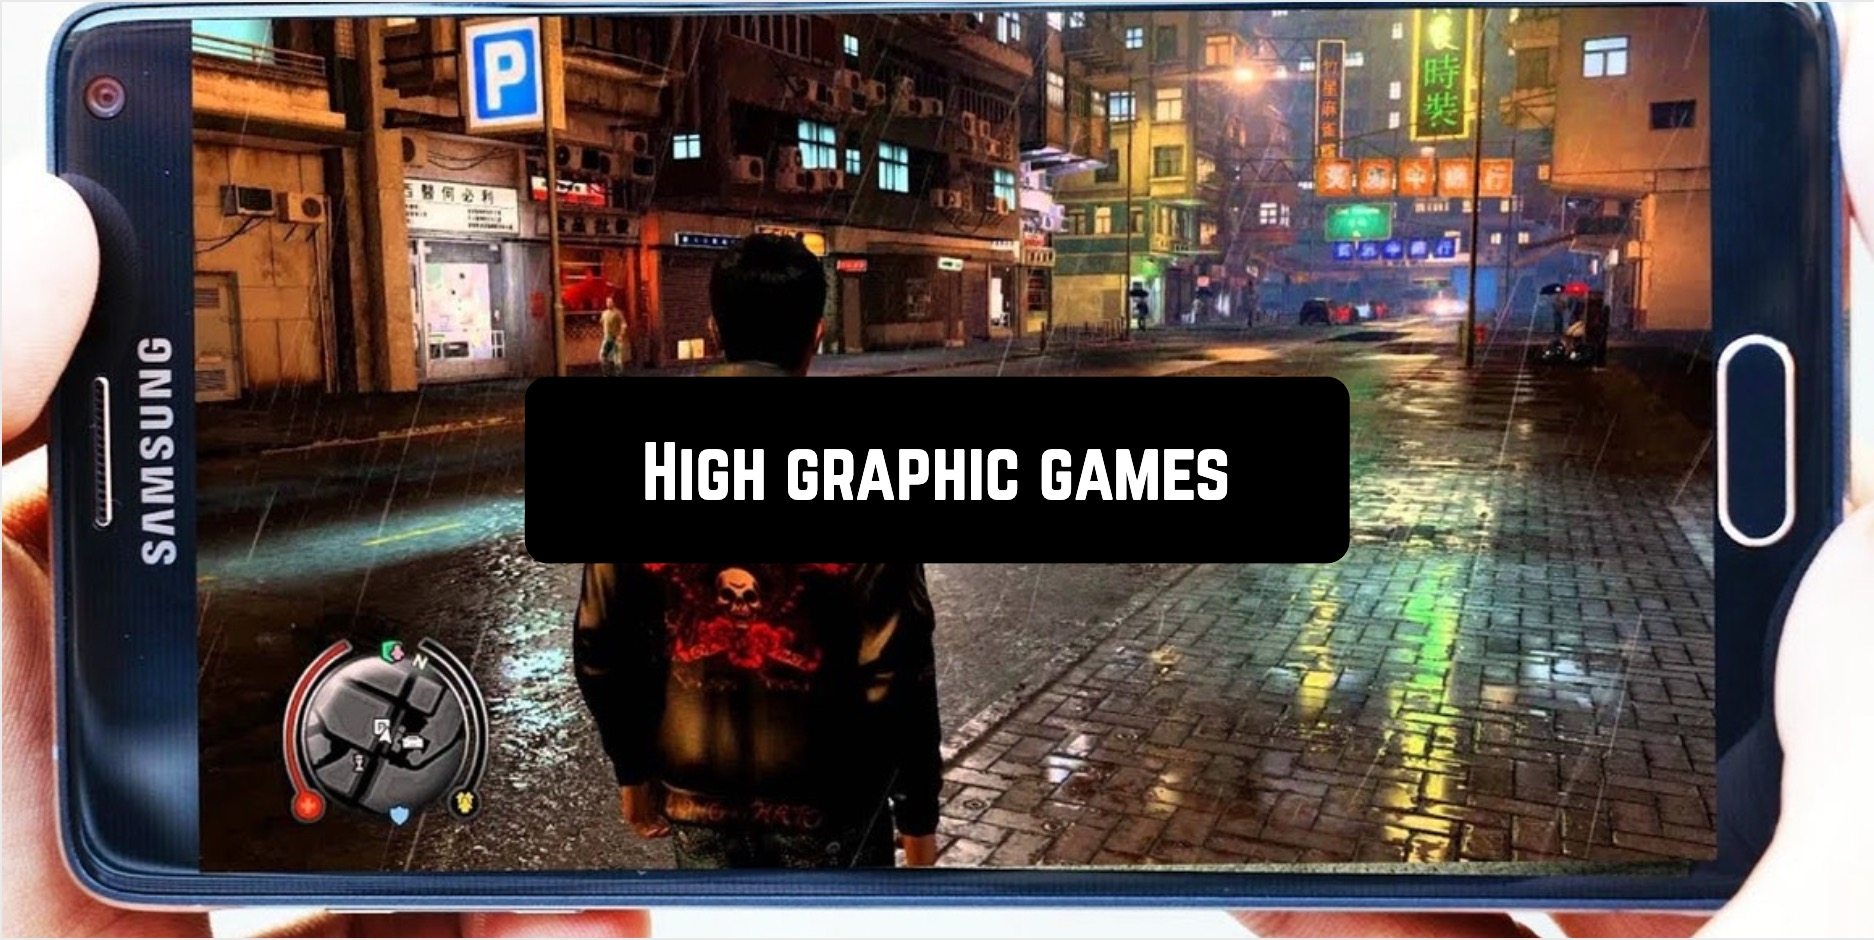 High graphic games